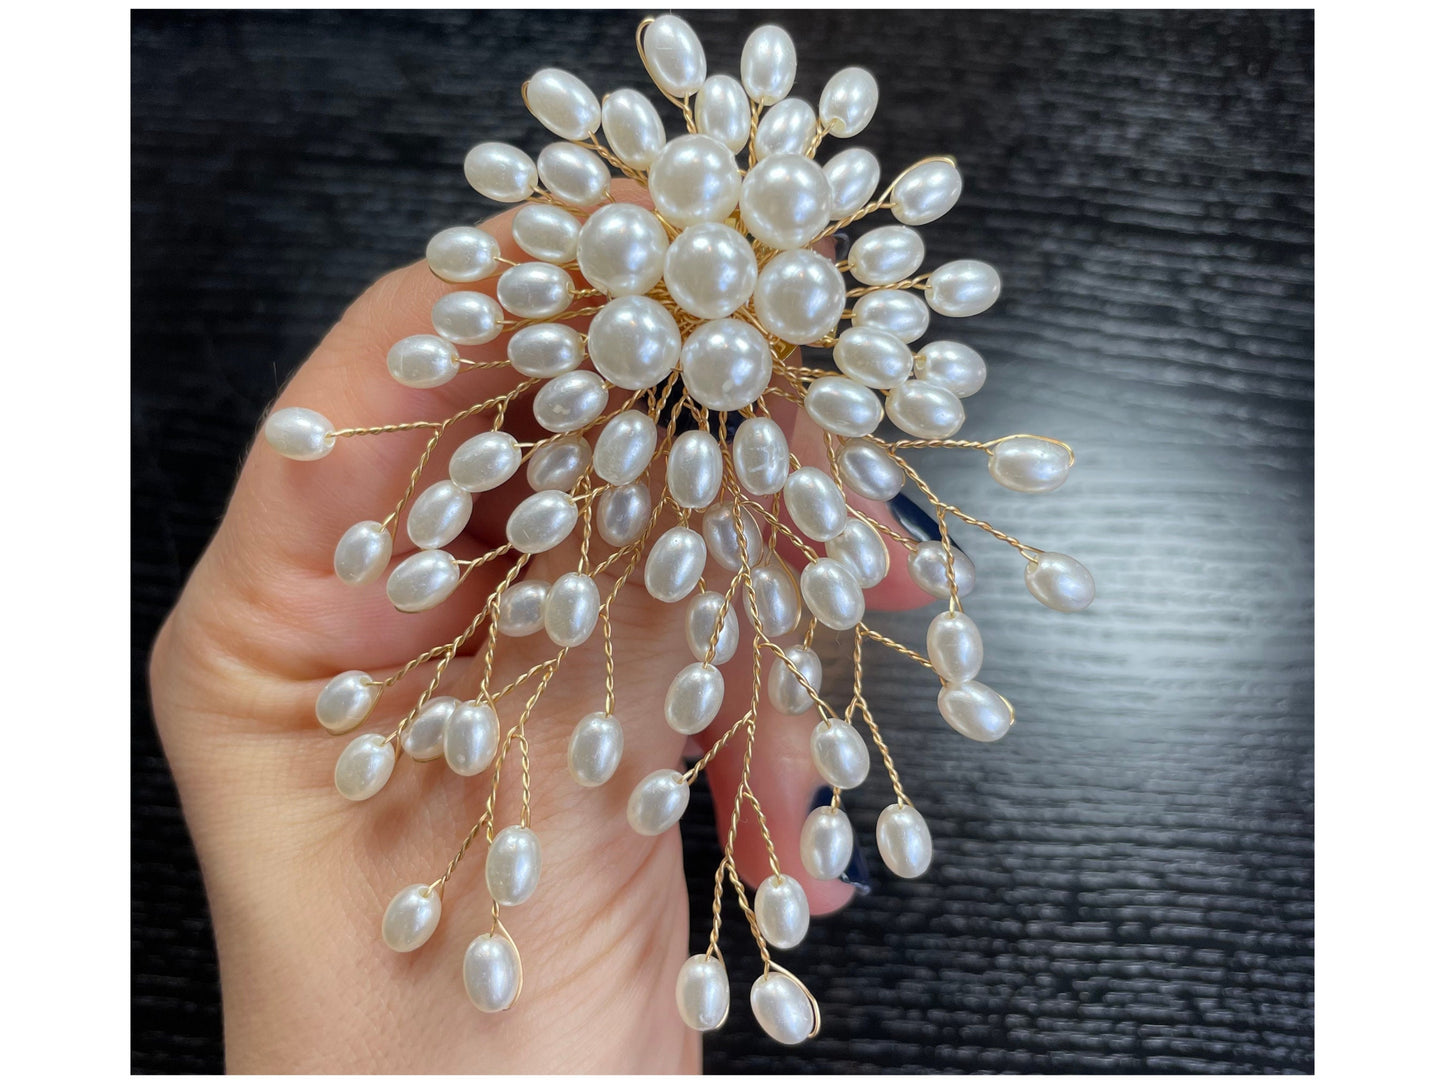 Stunning Large White Pearls Flower Brooch Pin / White Flower Pearl Brooch / Pearl brooch / Bridal Brooch / Wedding Brooch / Gift For Her